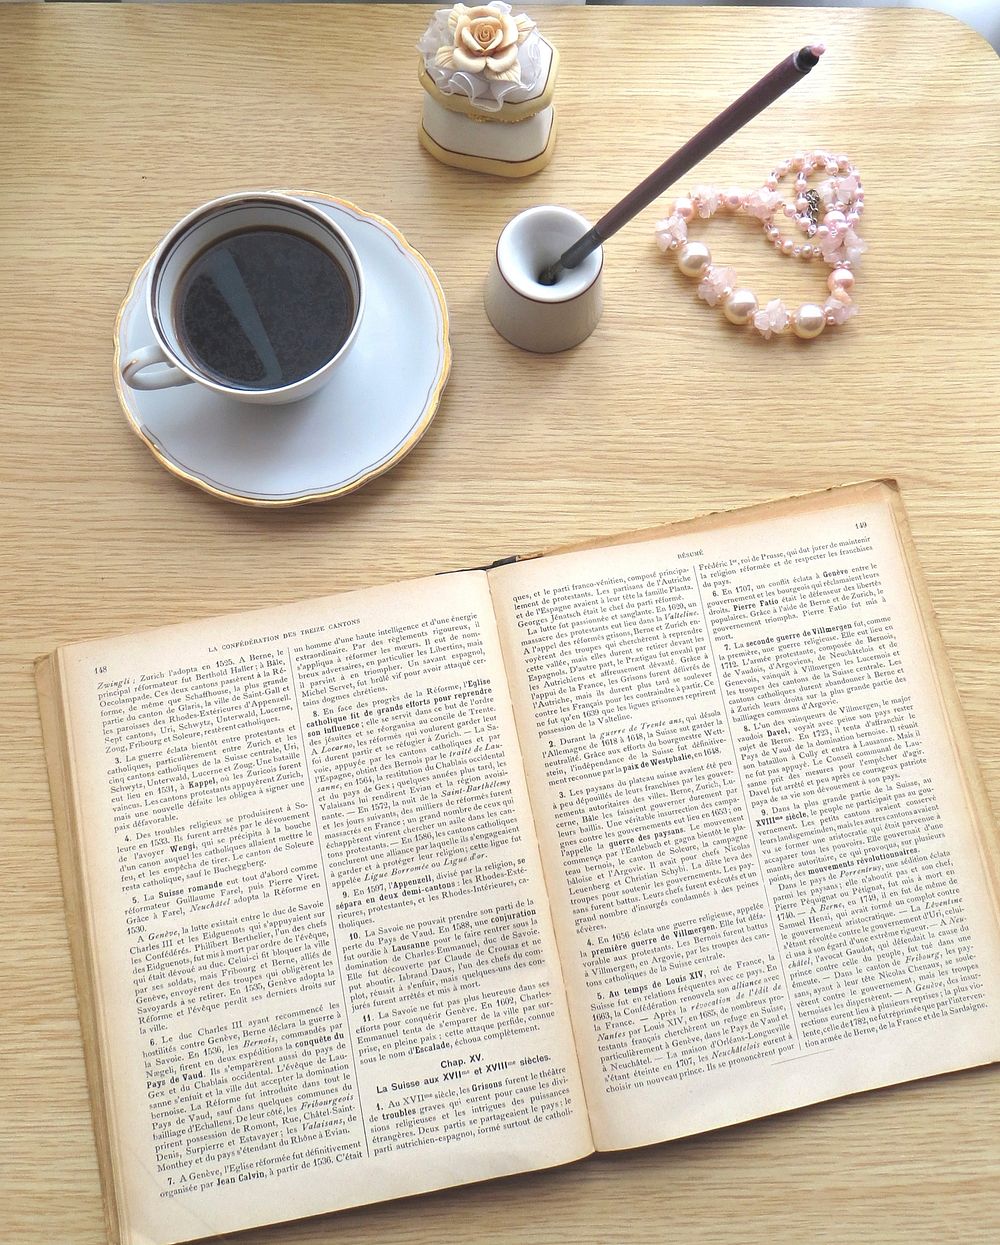 Free coffee and a book image, public domain drink CC0 image.